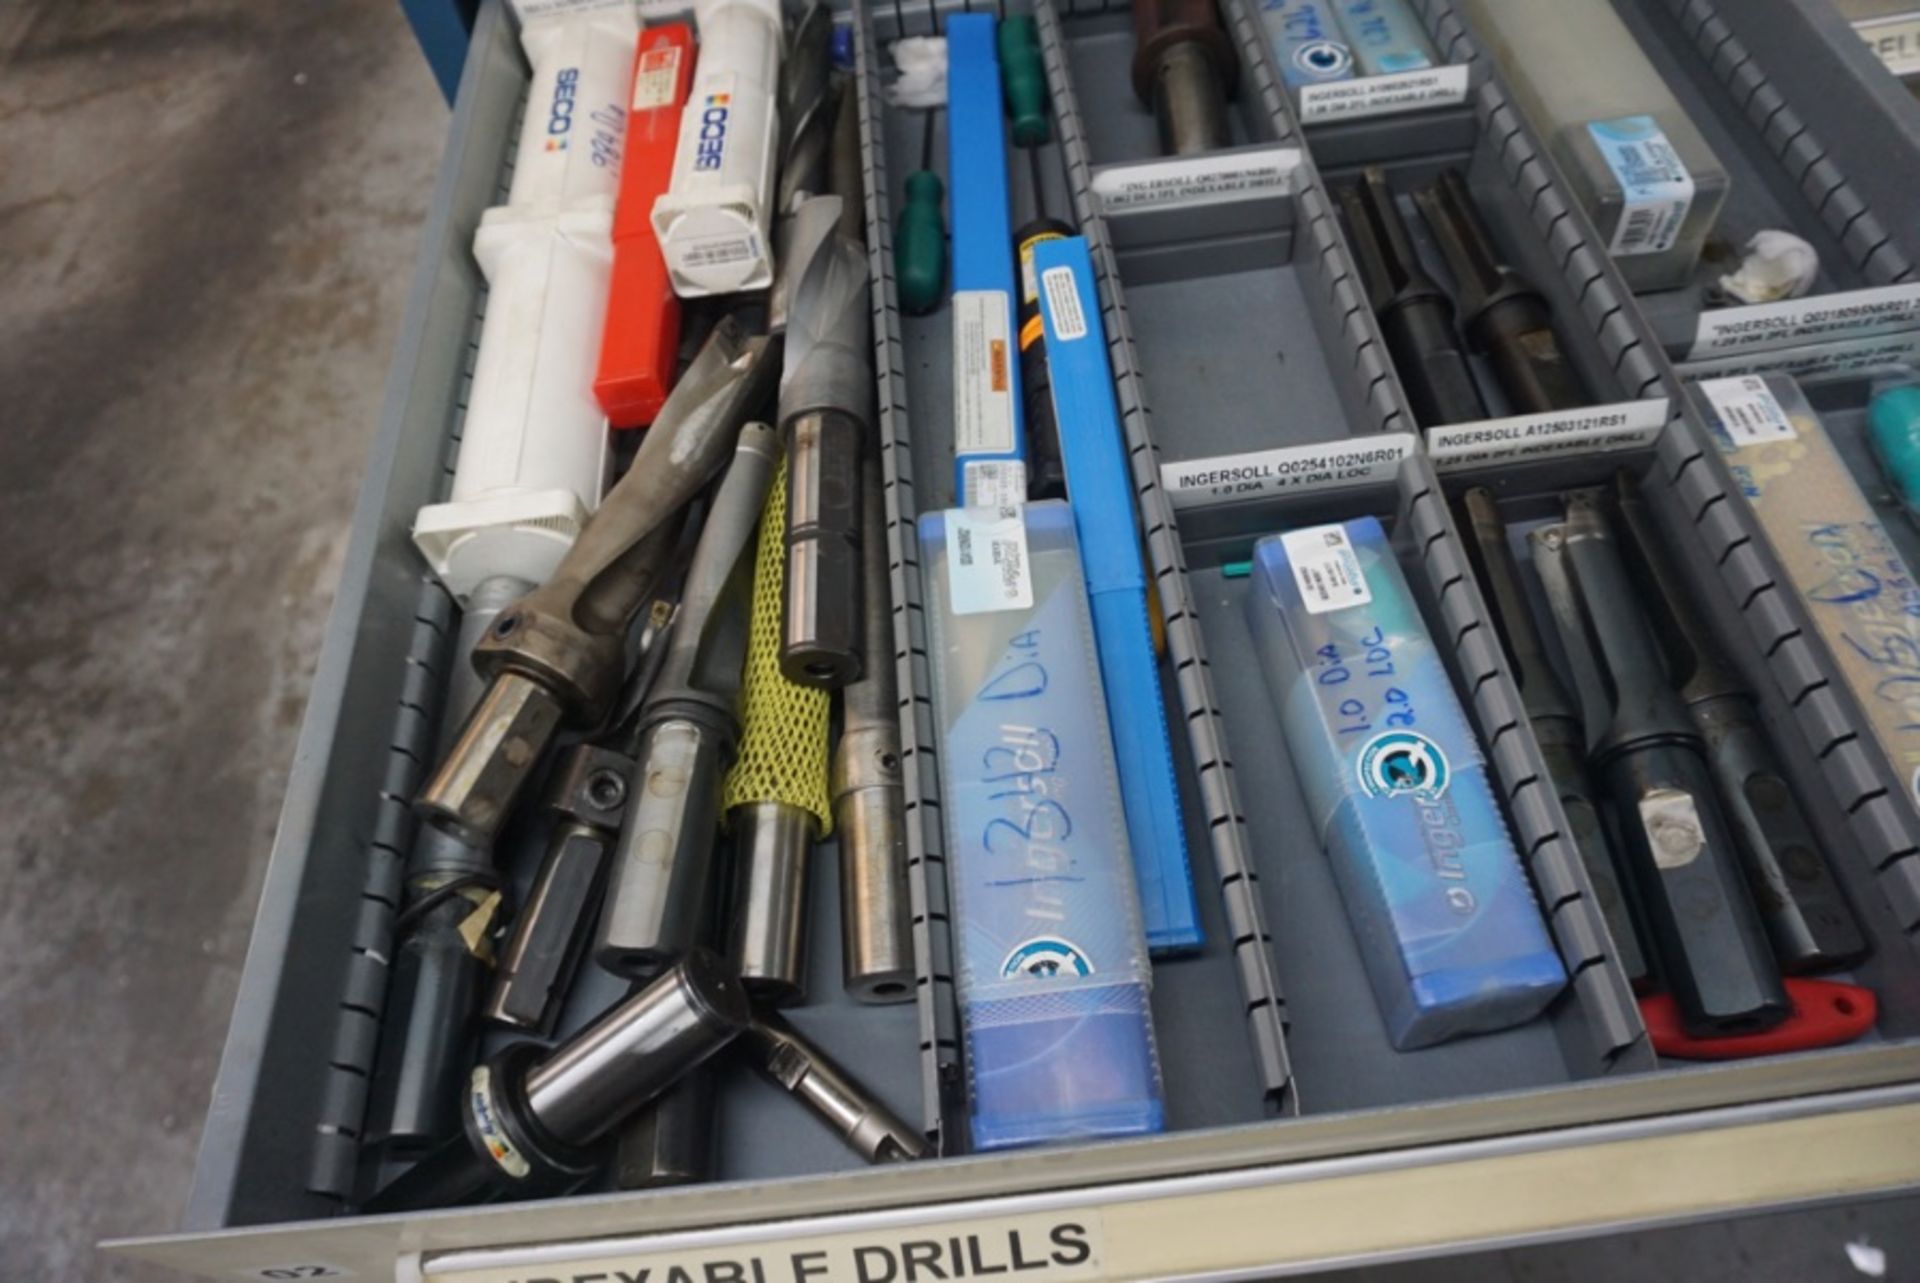 Indexable Drills